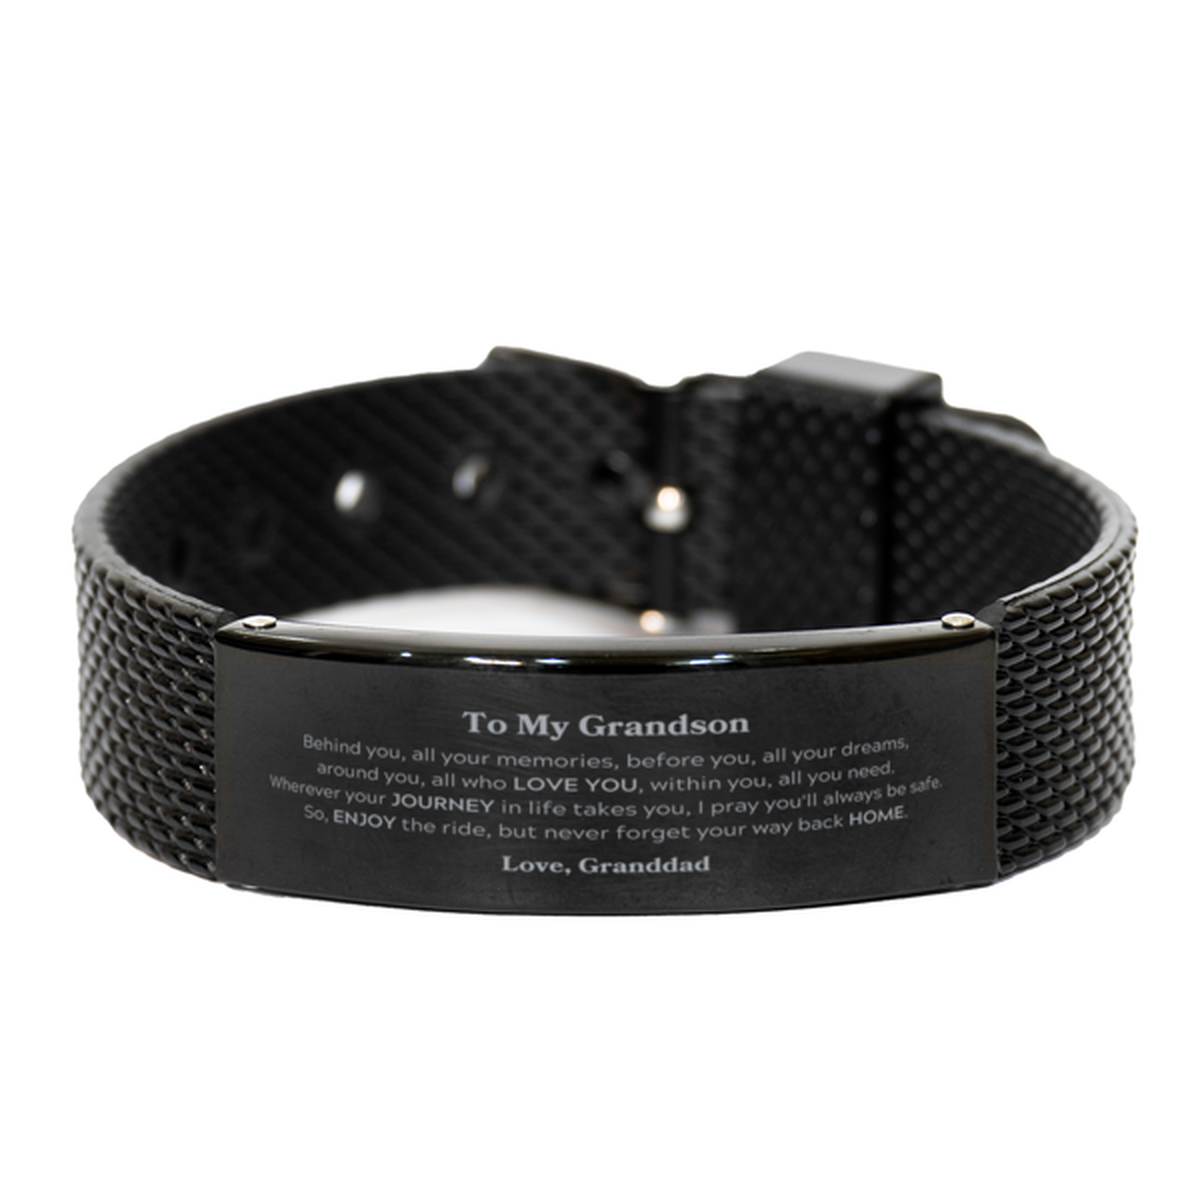 To My Grandson Graduation Gifts from Granddad, Grandson Black Shark Mesh Bracelet Christmas Birthday Gifts for Grandson Behind you, all your memories, before you, all your dreams. Love, Granddad